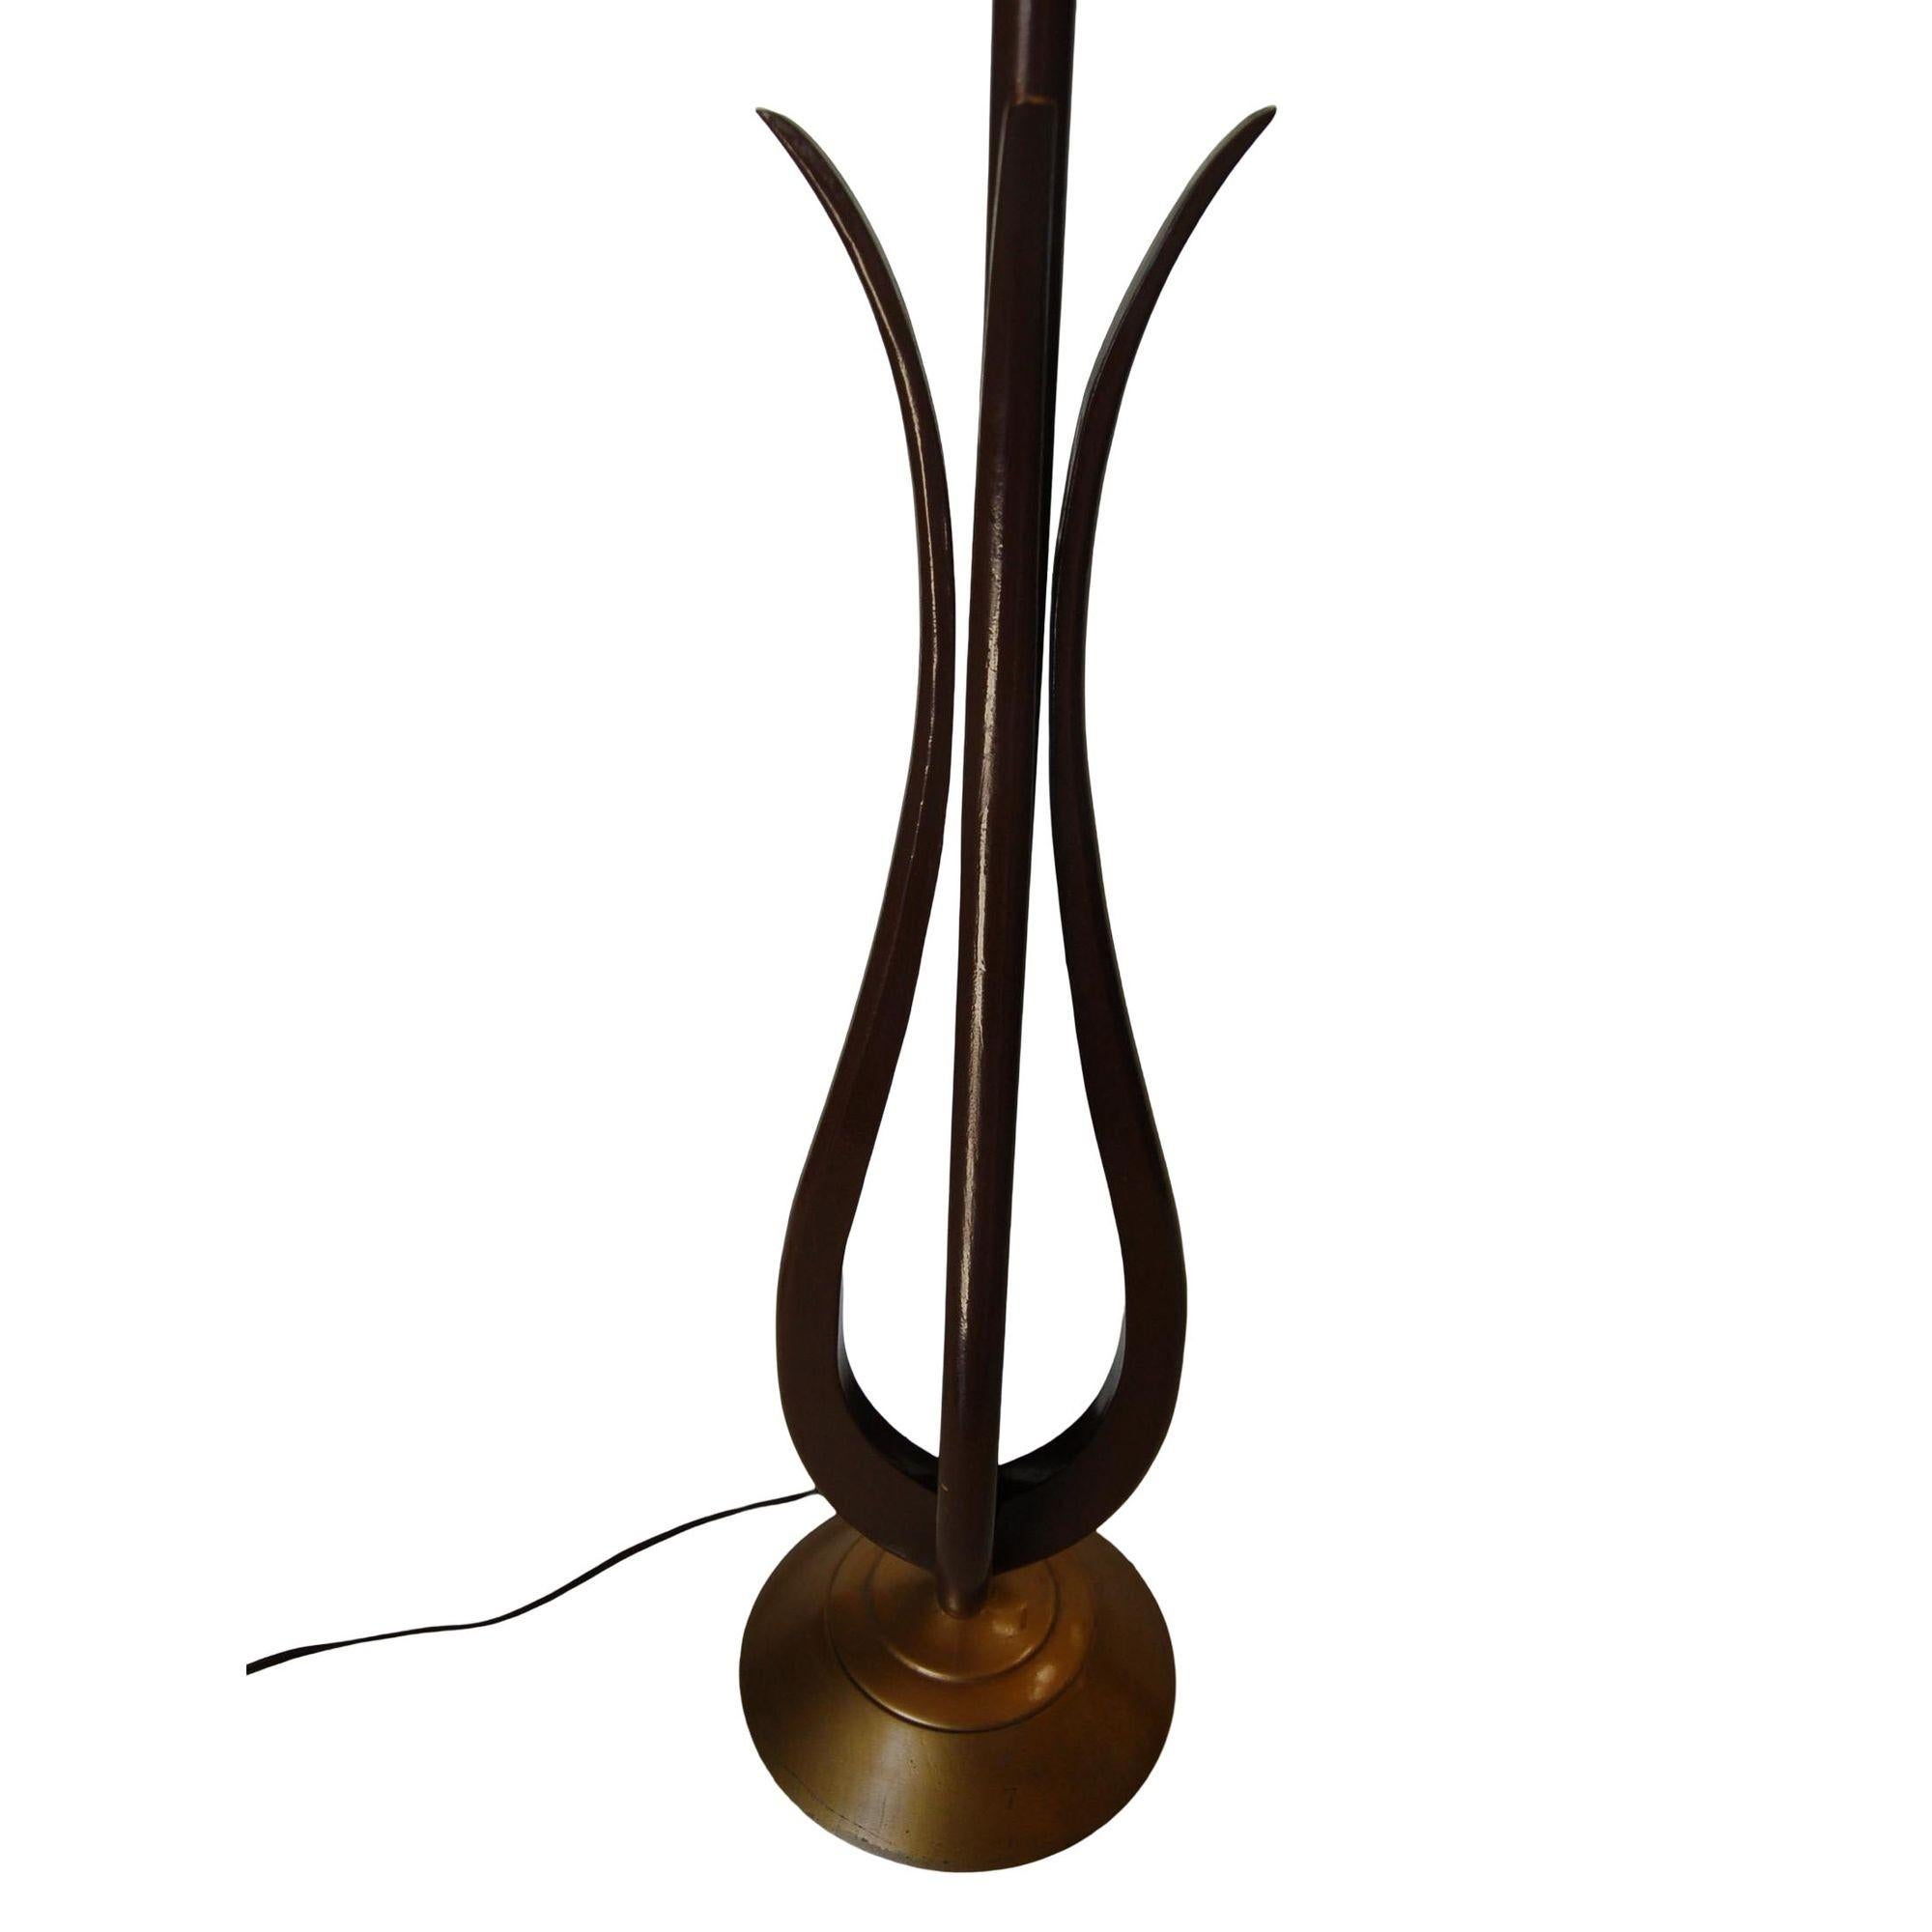 Pair of attractive Mid-century tulip-shaped sculptural Walnut wood table lamps with Brass tone base resembling the shape of a Greek harp. Each lamp features a danish Inspired design with a unique flair reminiscent of American companies like Knoll